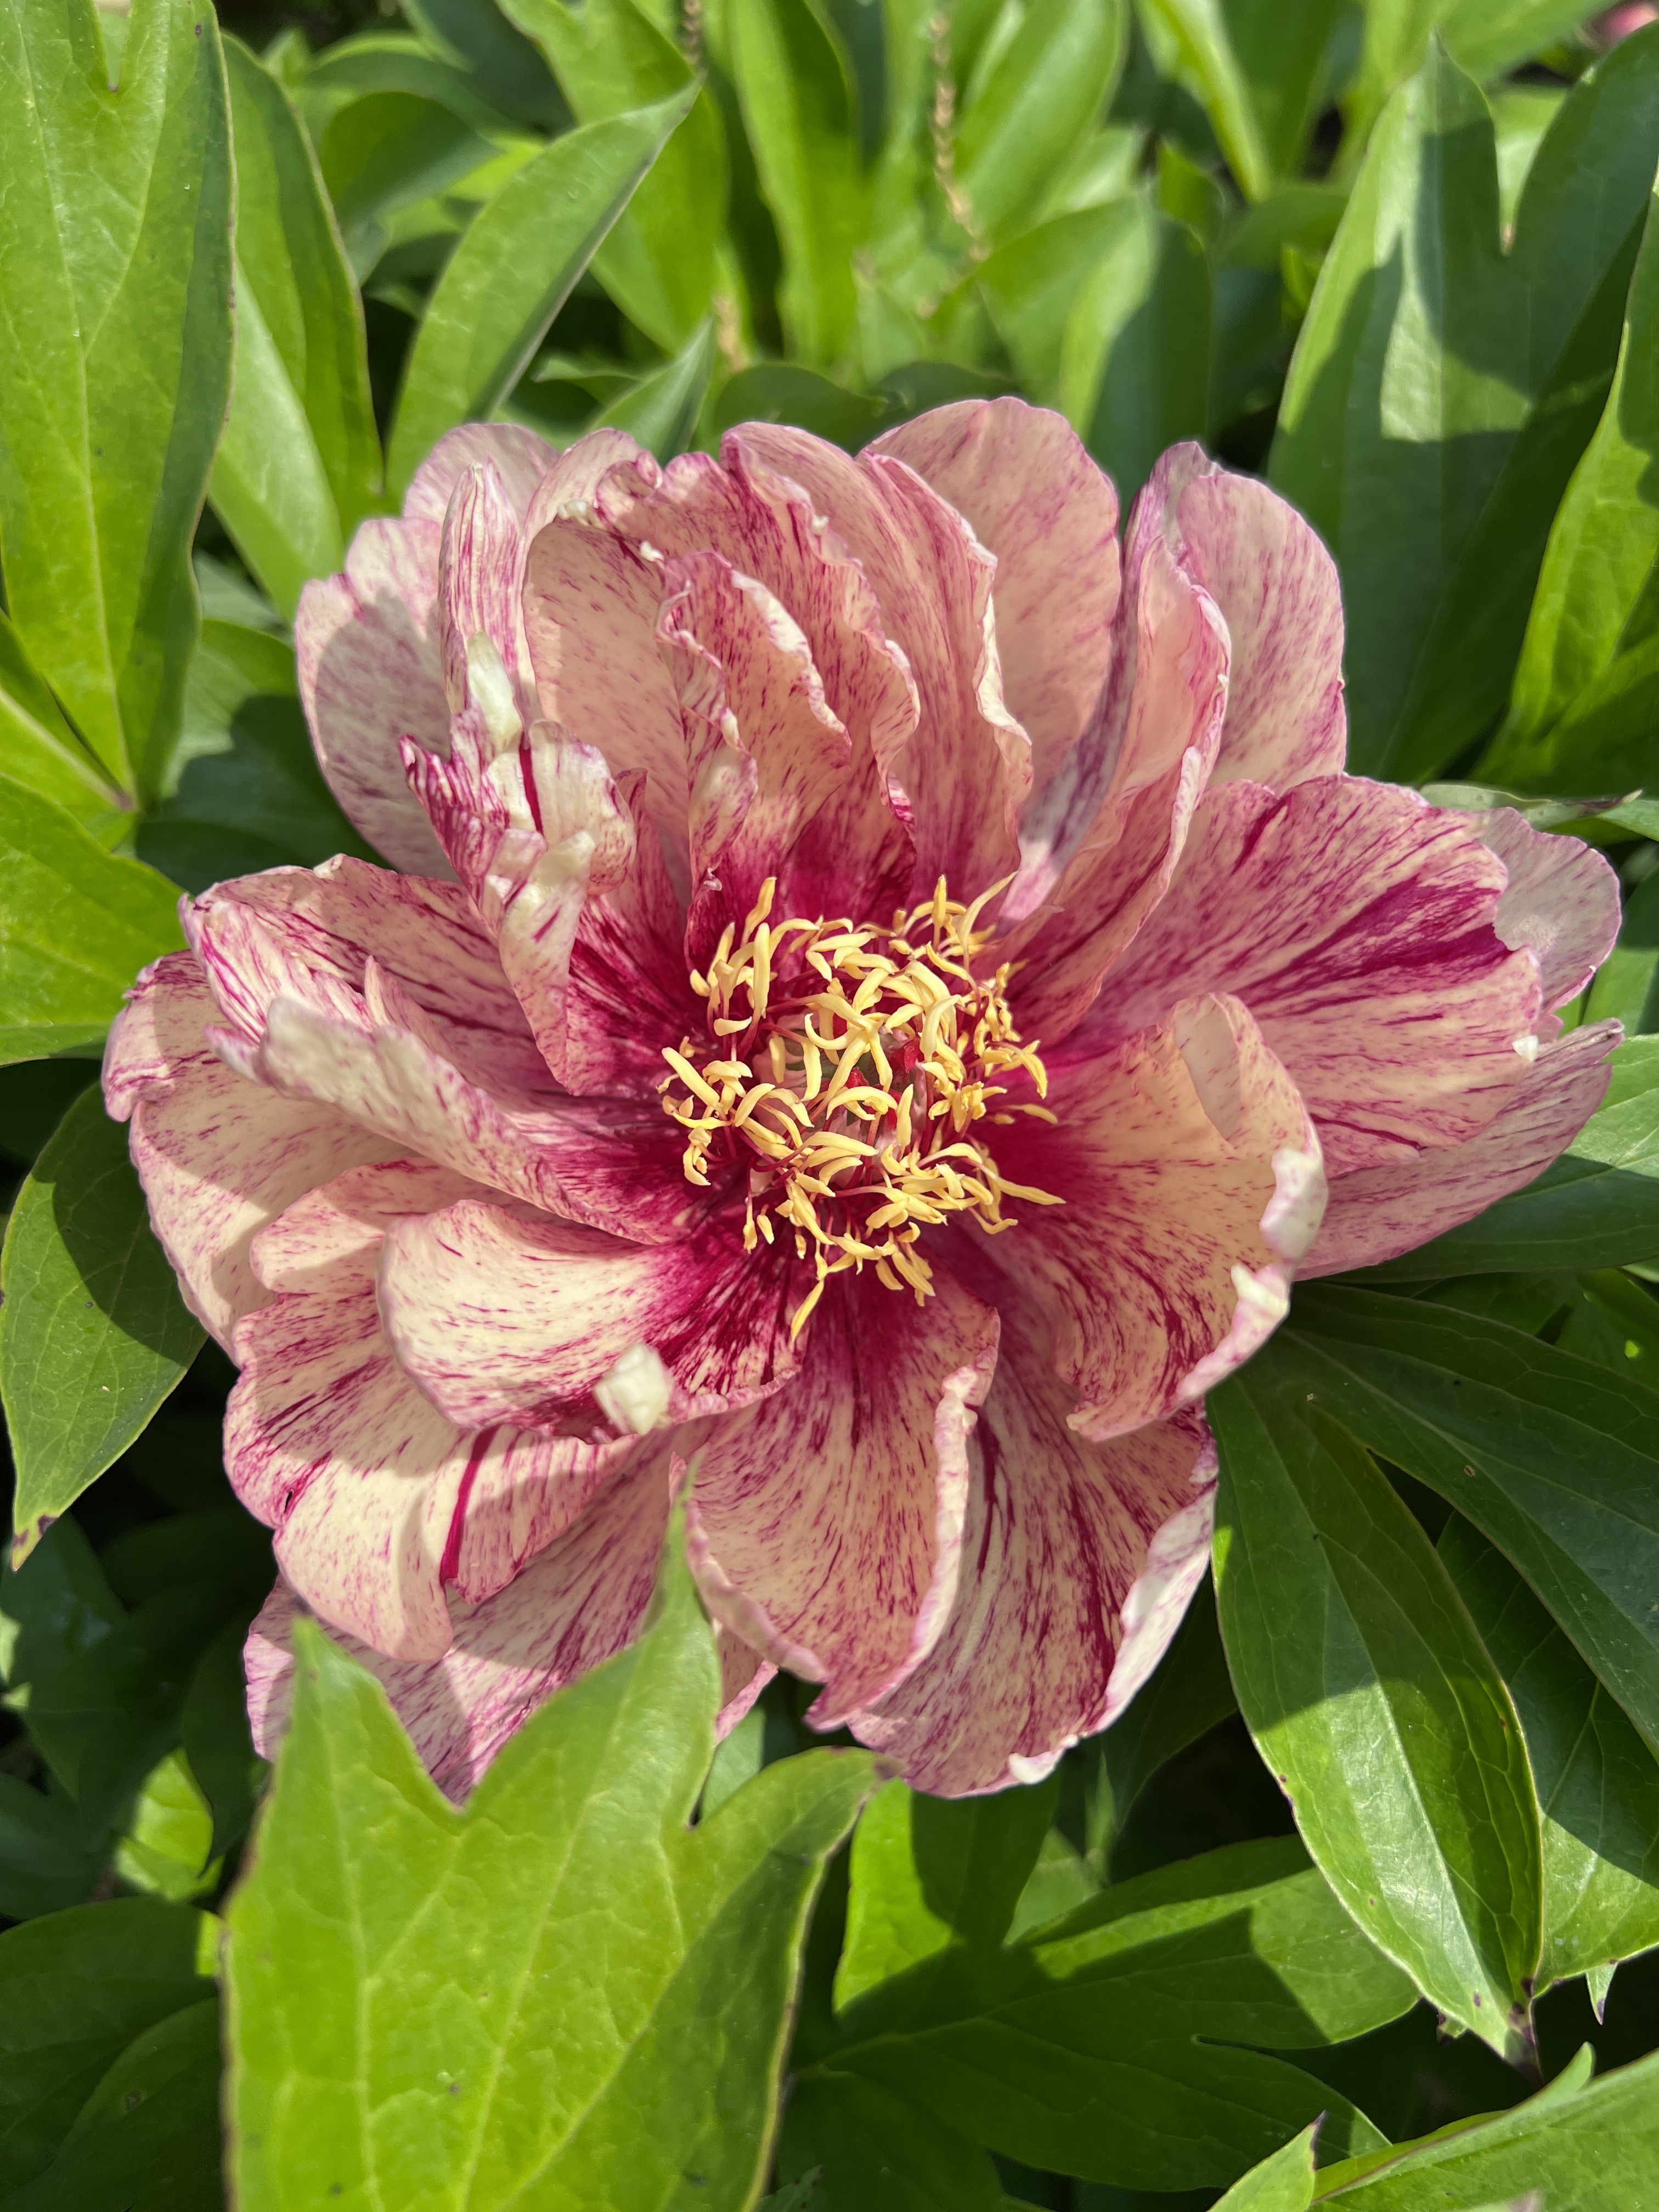 images/plants/paeonia/pae-all-that-jazz/pae-all-that-jazz-0004.JPG